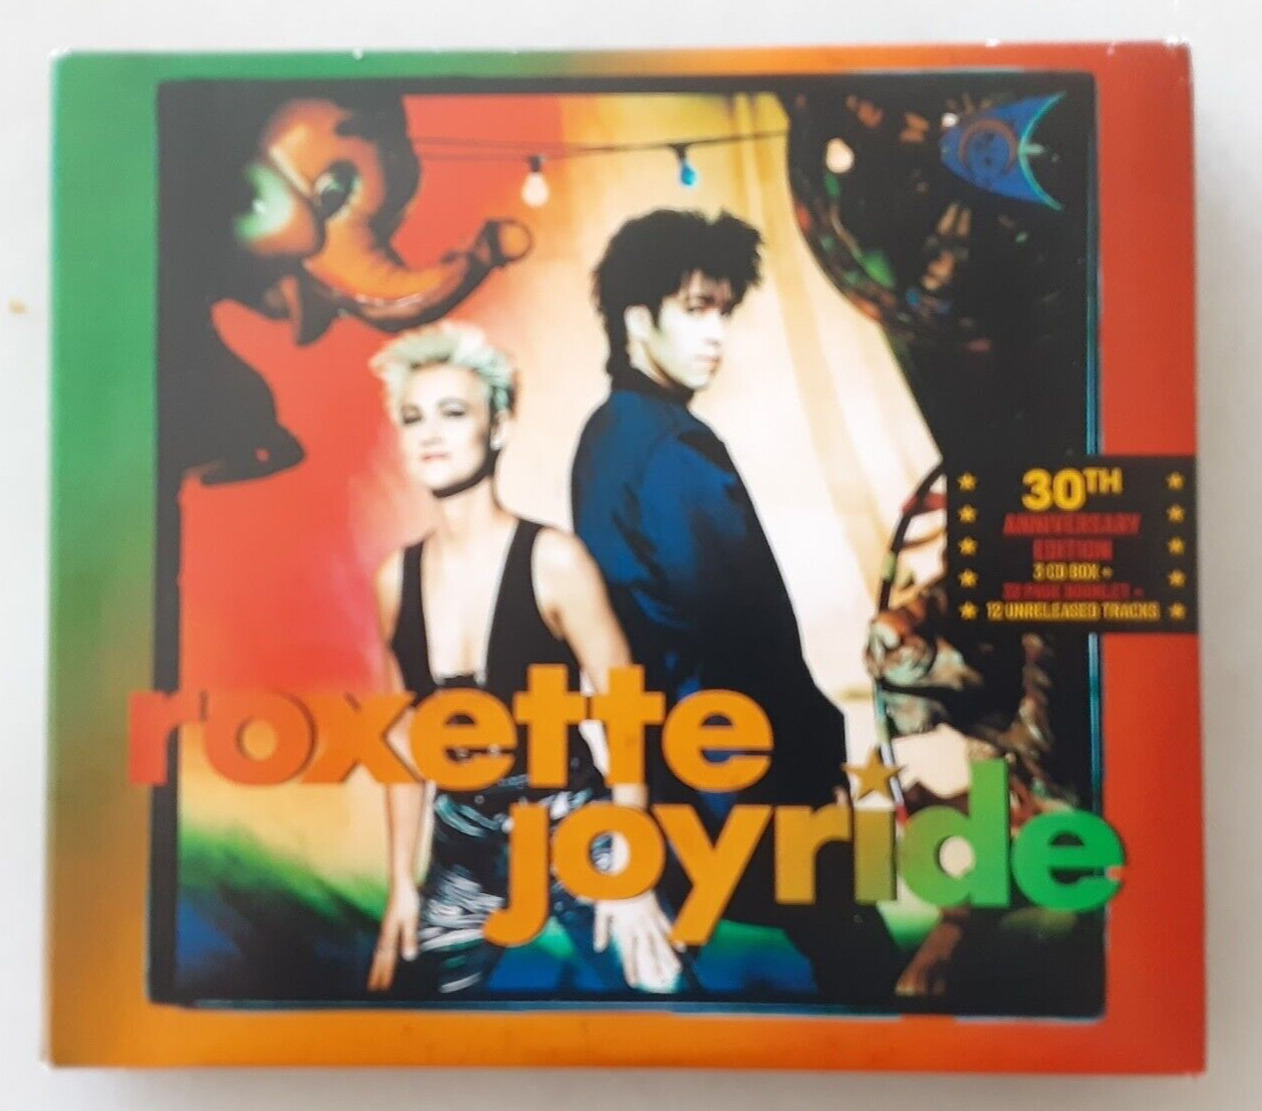 Roxette - Joyride: 30th Anniversary Deluxe [Used Very Good CD] Deluxe Edition